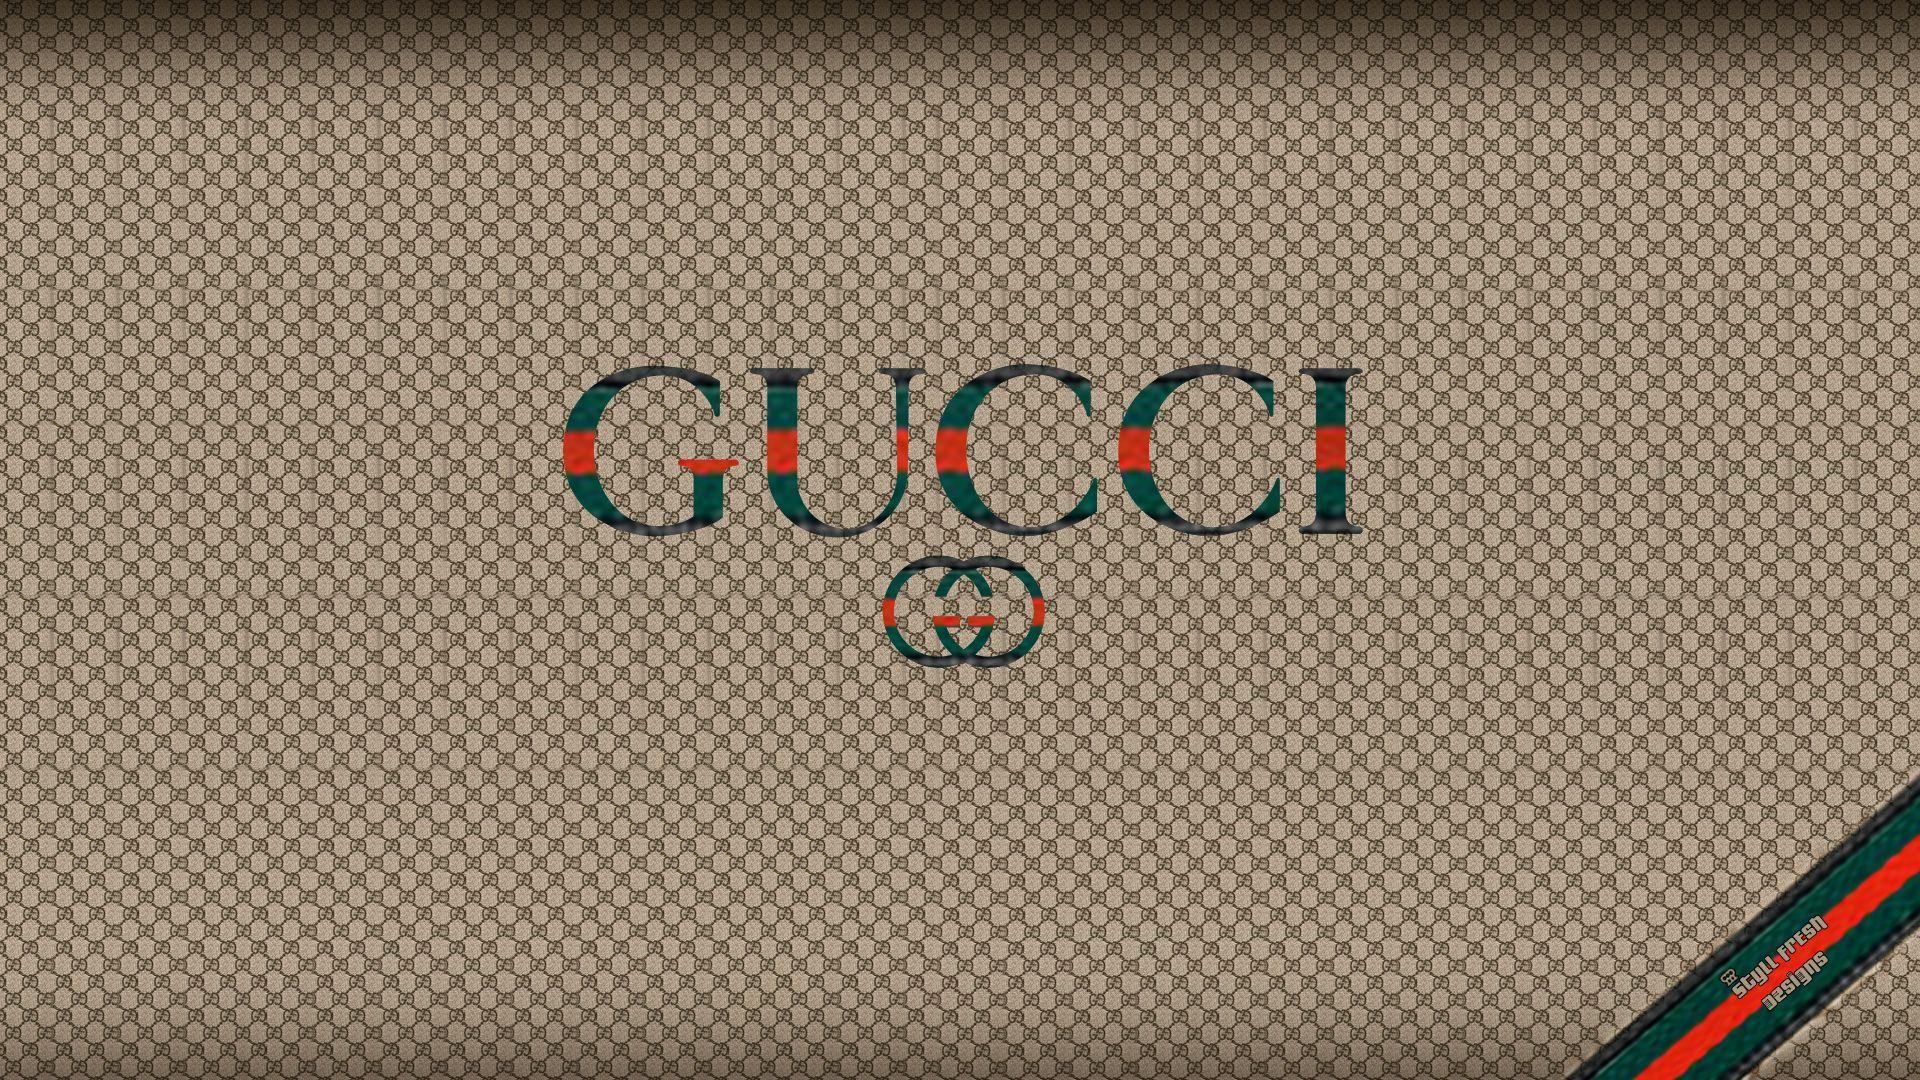 Gucci and Supreme Wallpapers - Top Free Gucci and Supreme